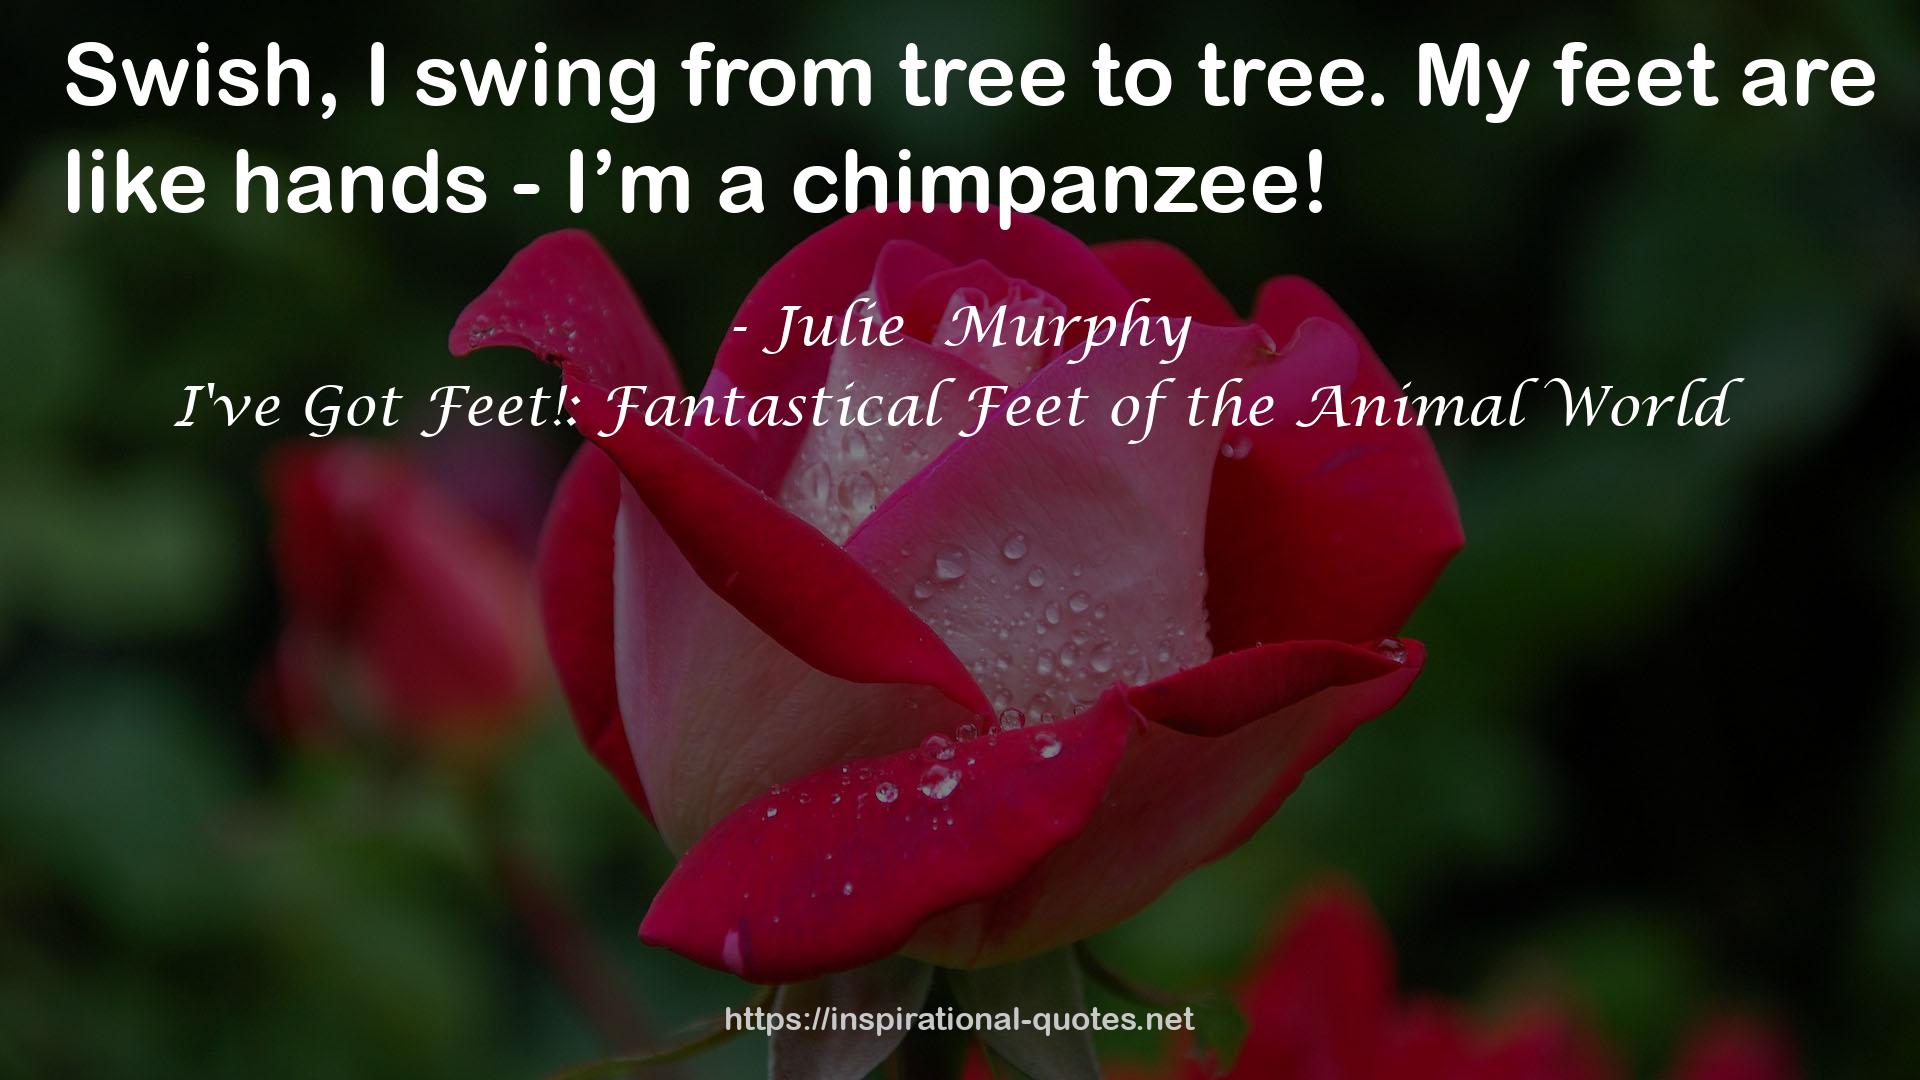 I've Got Feet!: Fantastical Feet of the Animal World QUOTES